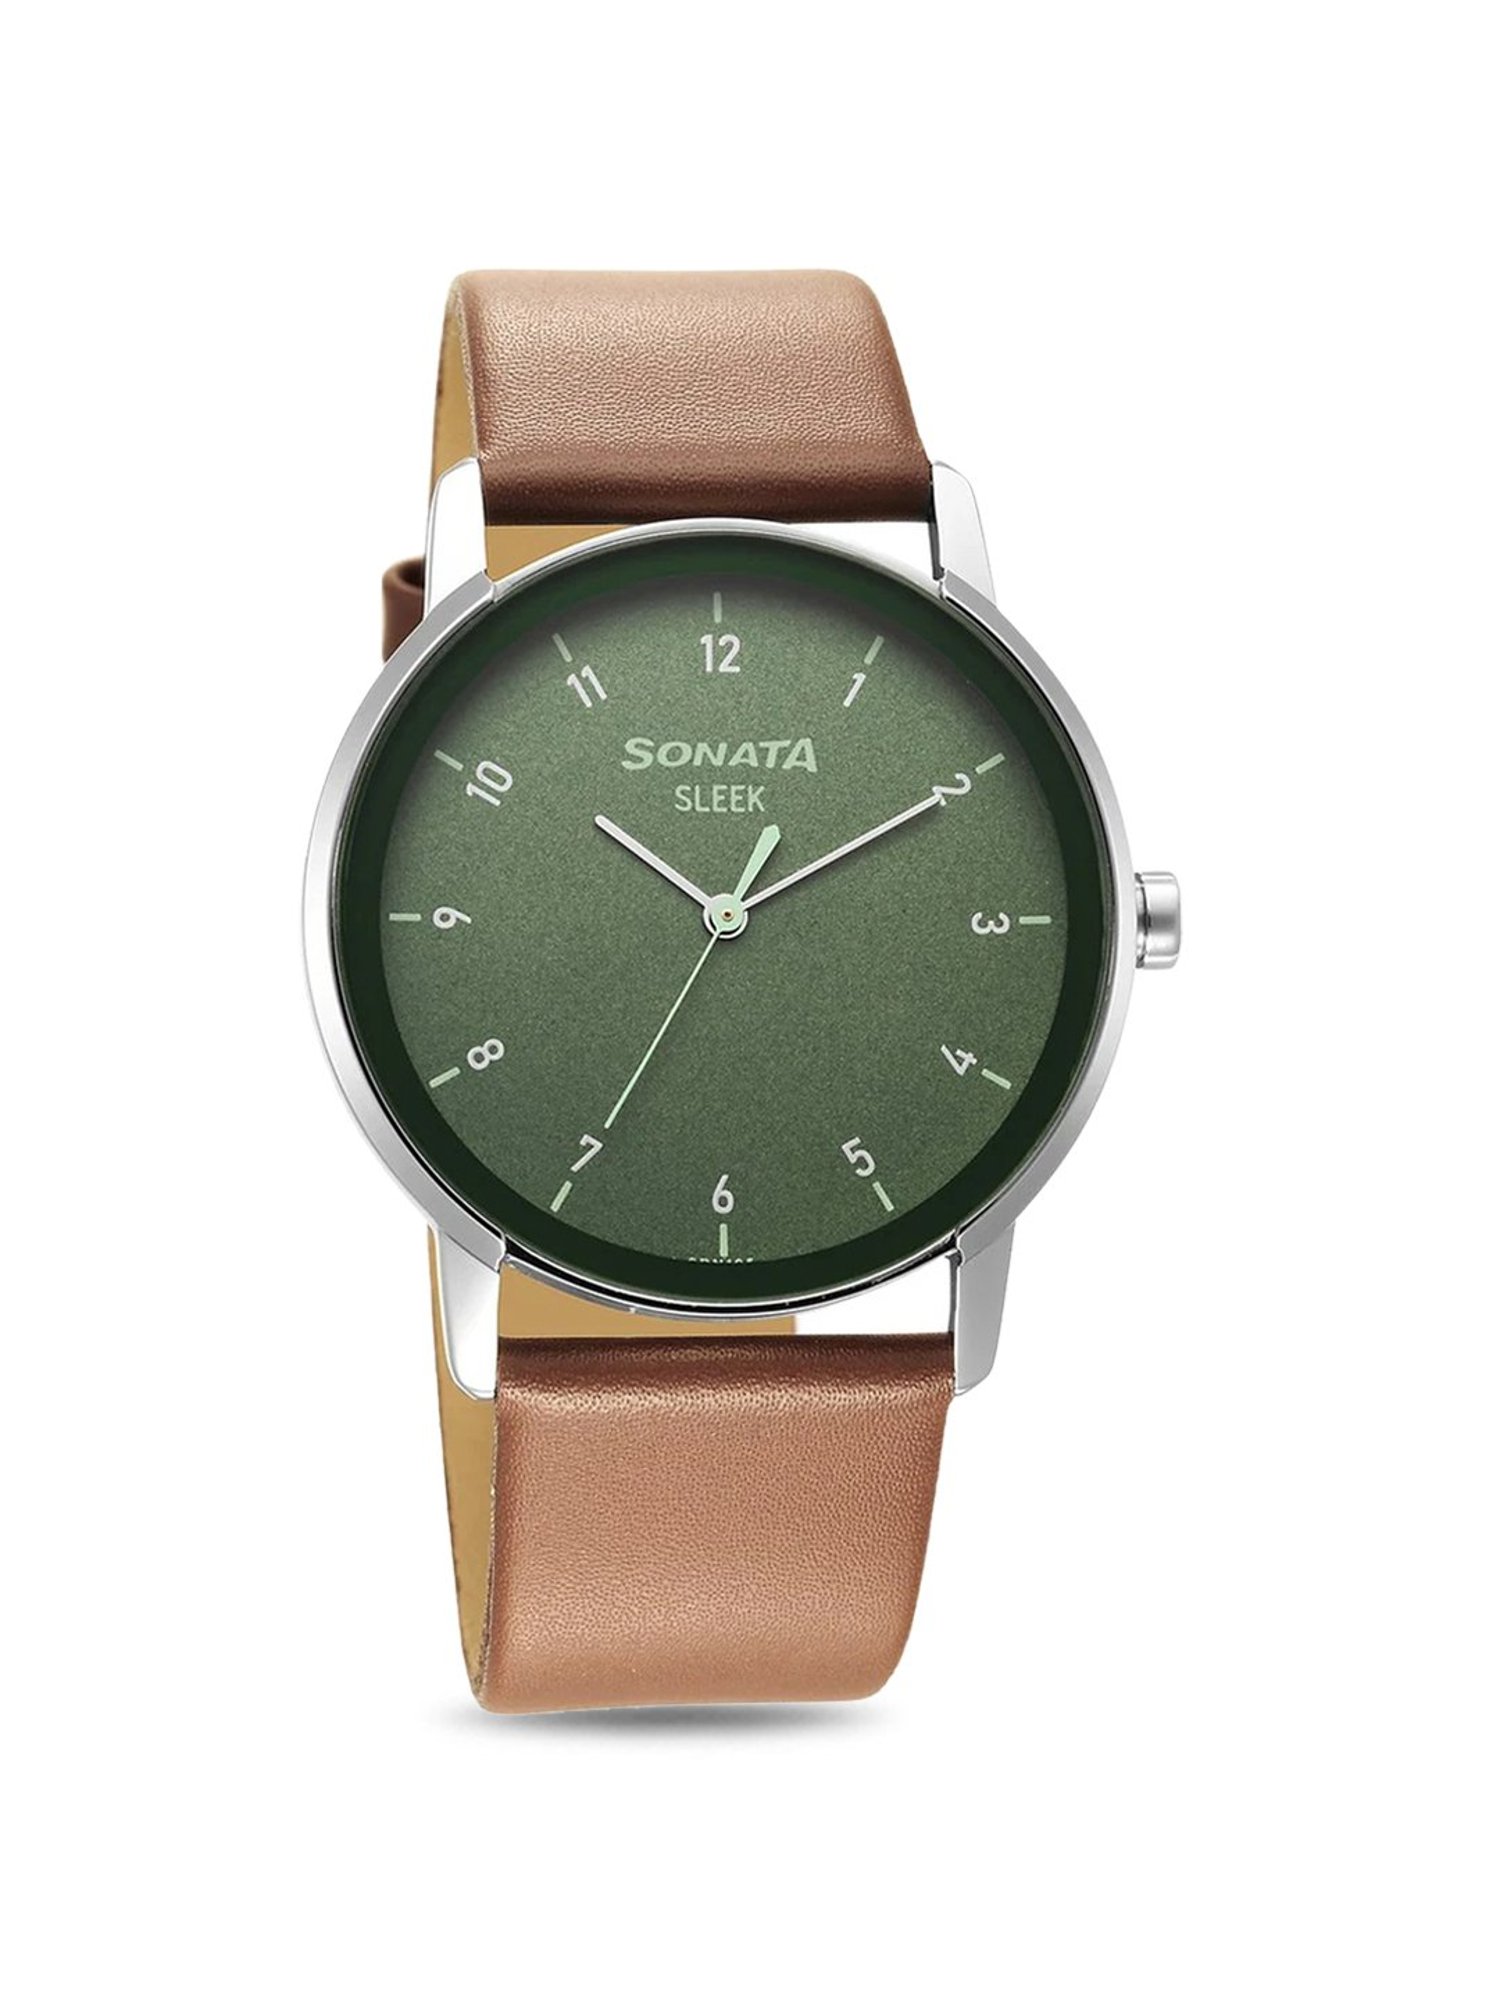 Sonata NM77031SL01 Analog Watch for Men with Day & Date Function in Jaipur  at best price by Krishna Watch Company - Justdial